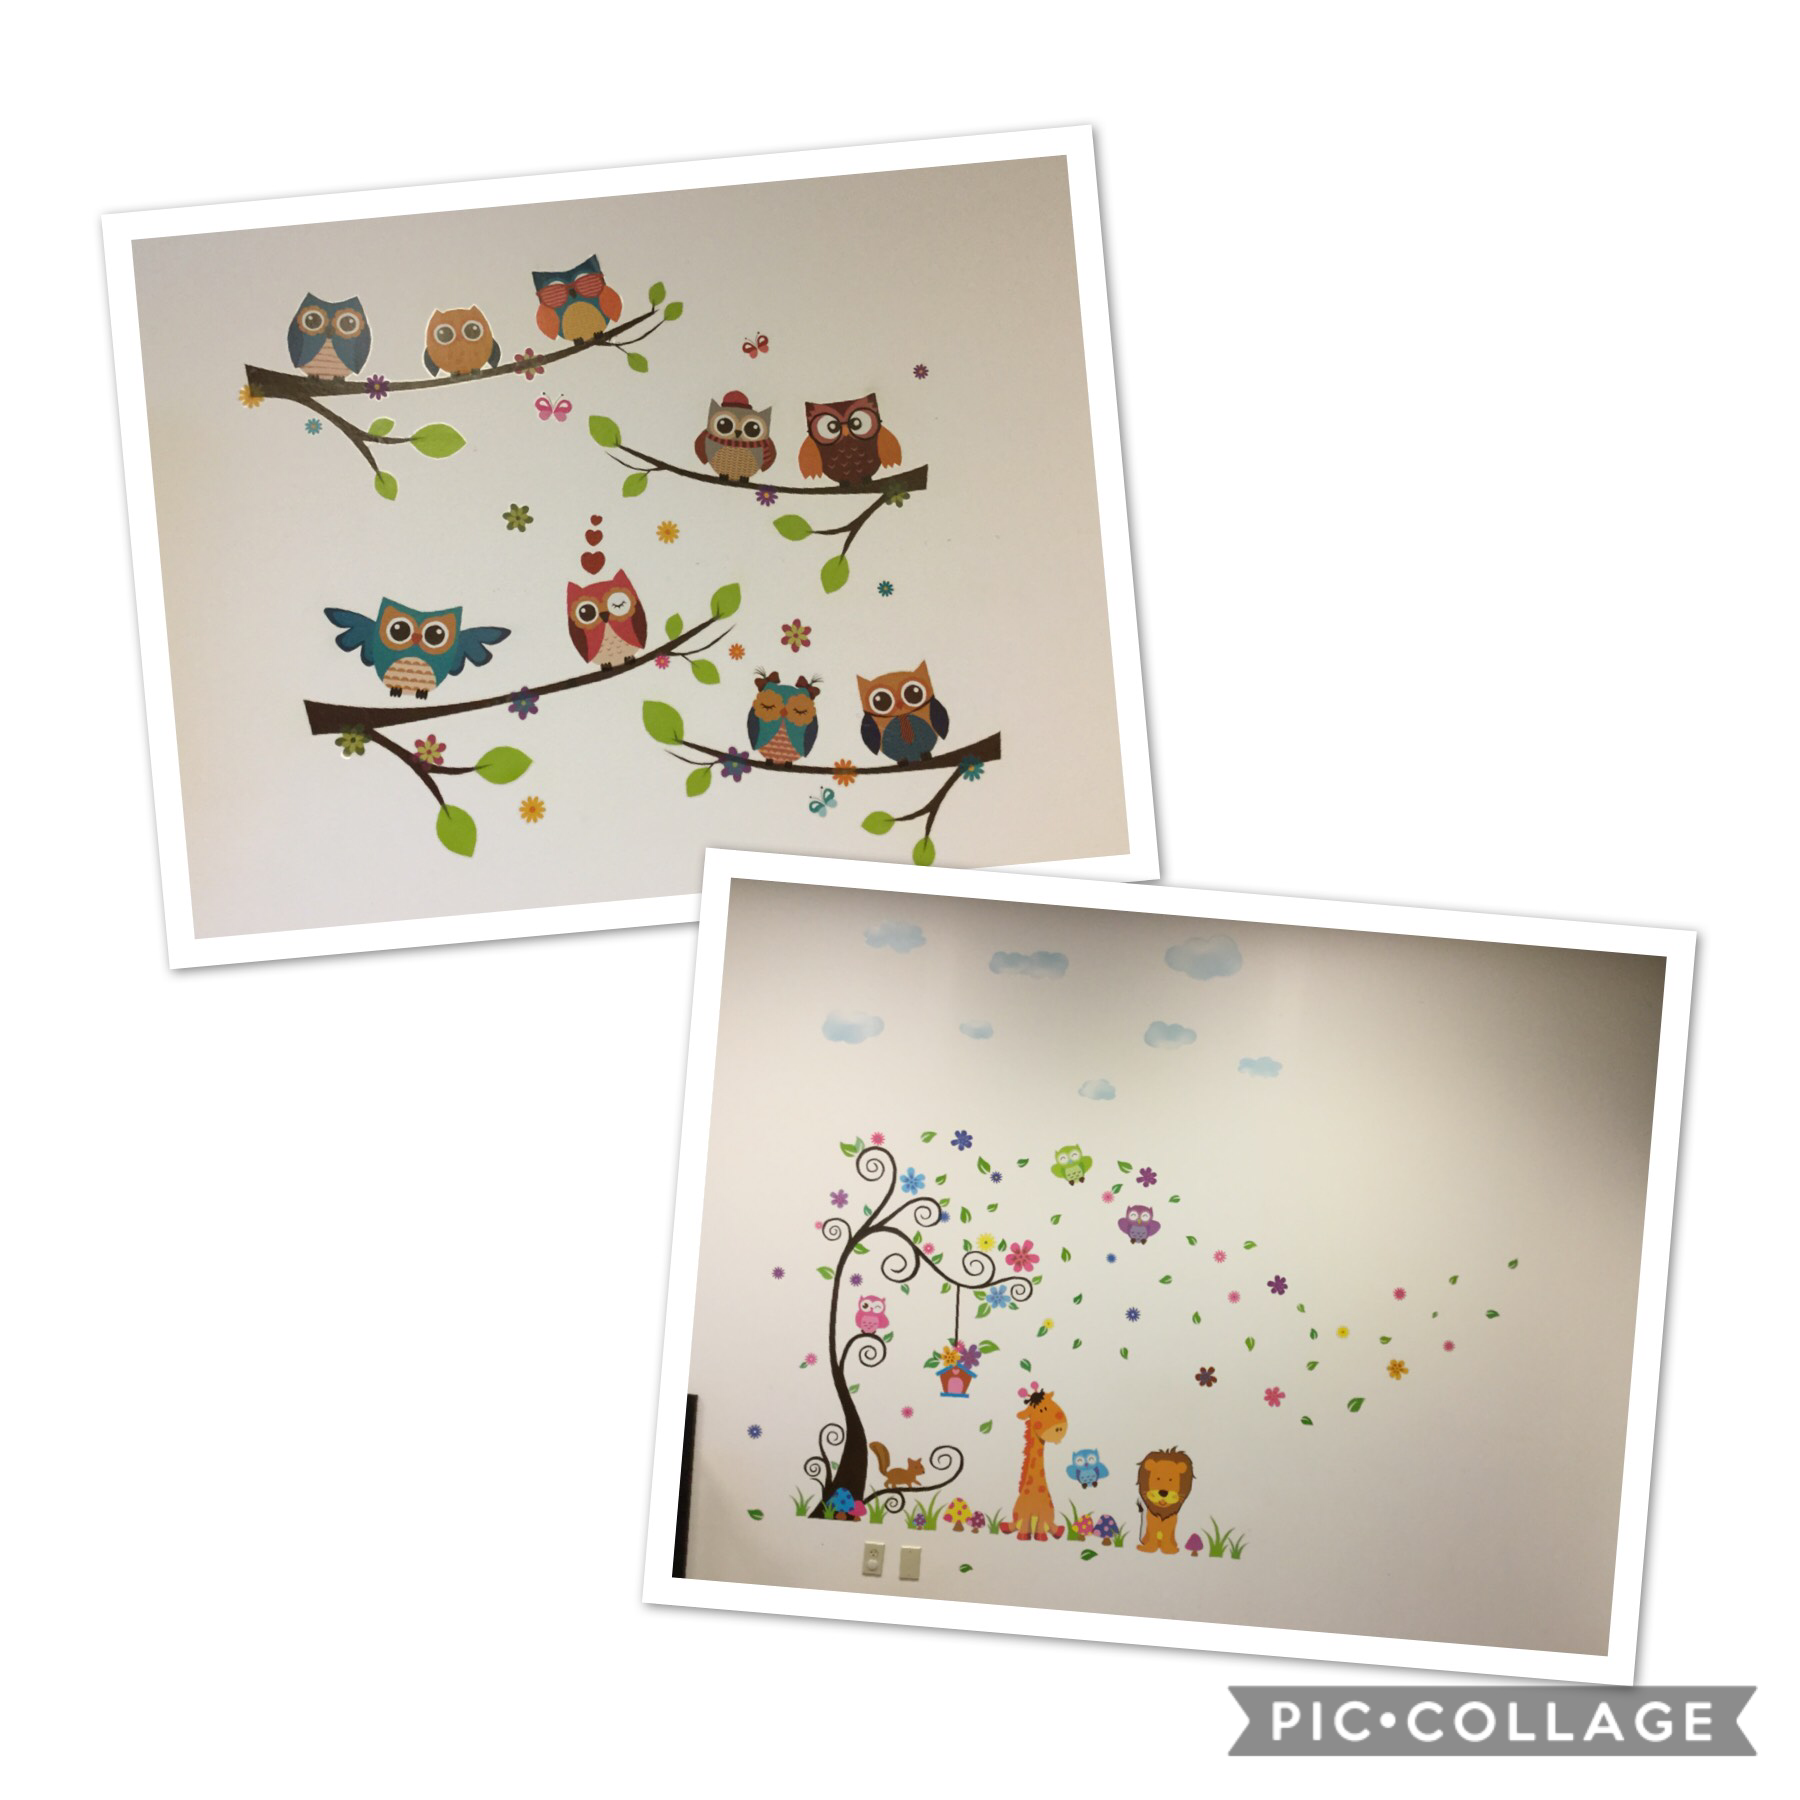 I did these sticker murals for my church. I hope they look good